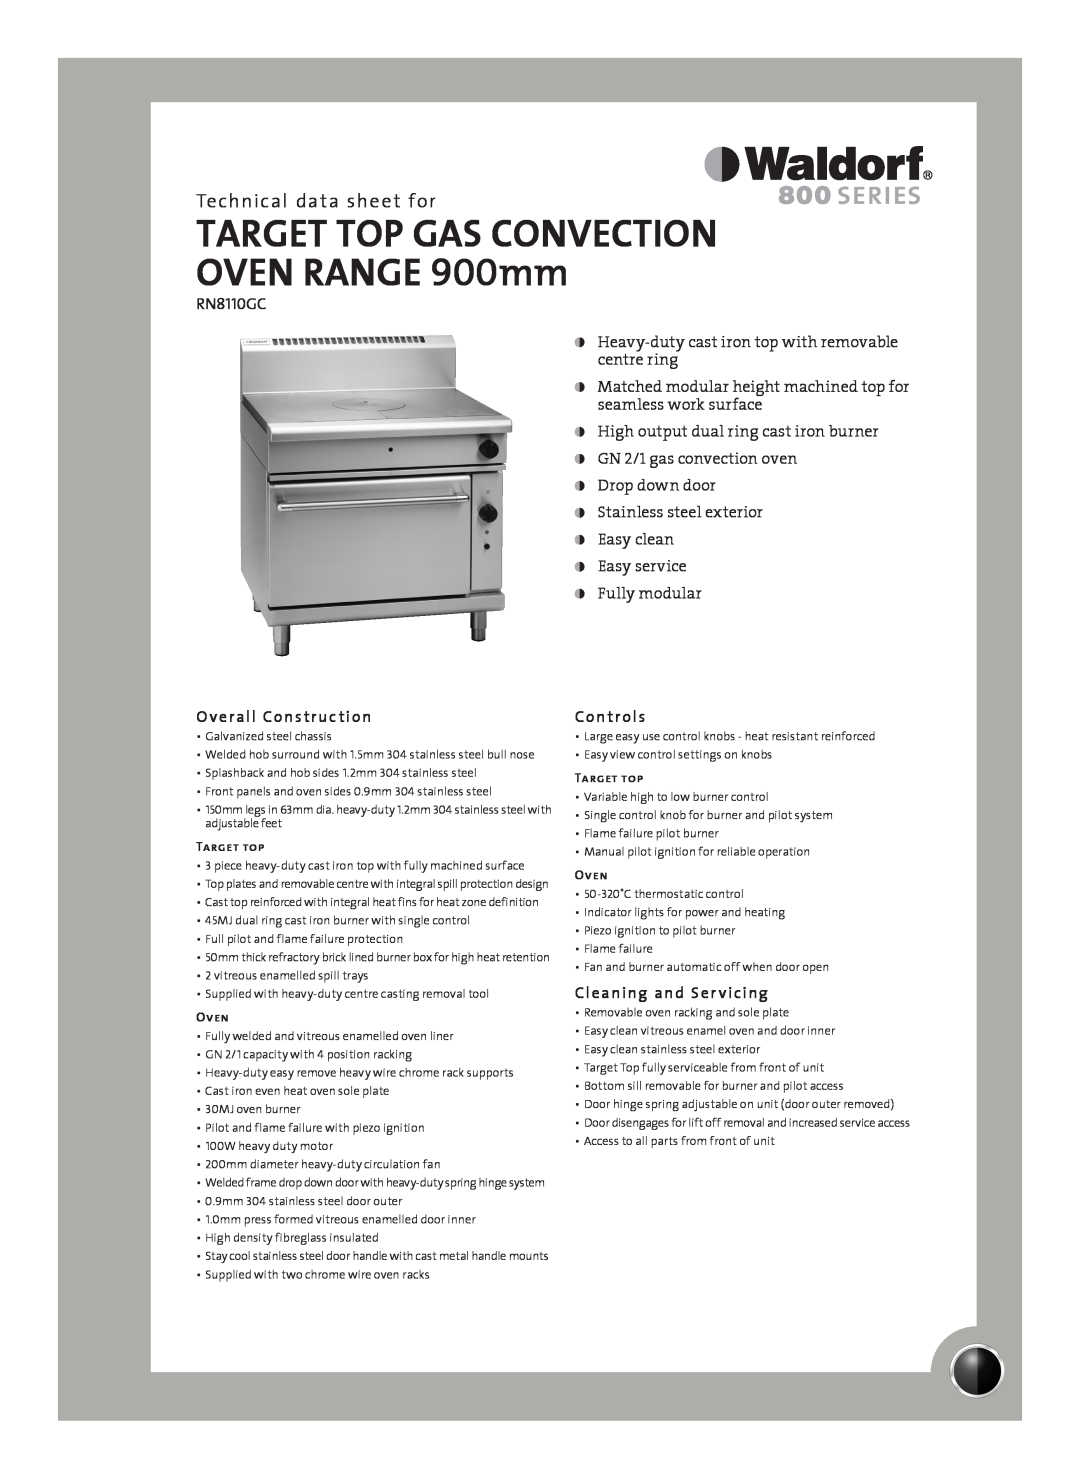 Moffat RN8110GC manual Technical data sheet for, Overall Construction, Controls, Cleaning and Ser vicing, Target top, Oven 